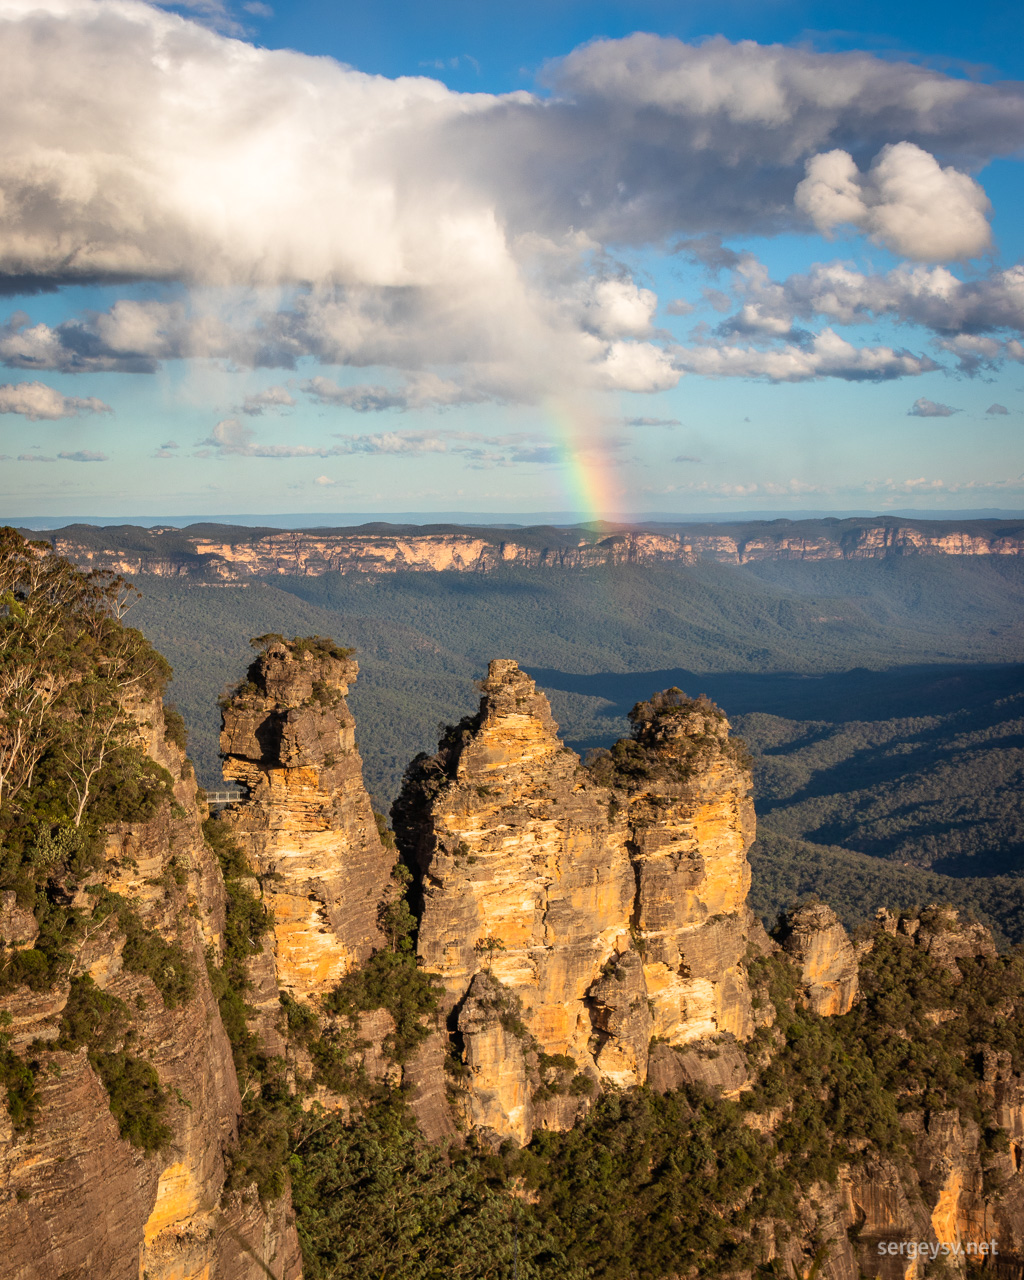 The Three Sisters and a rainbow!